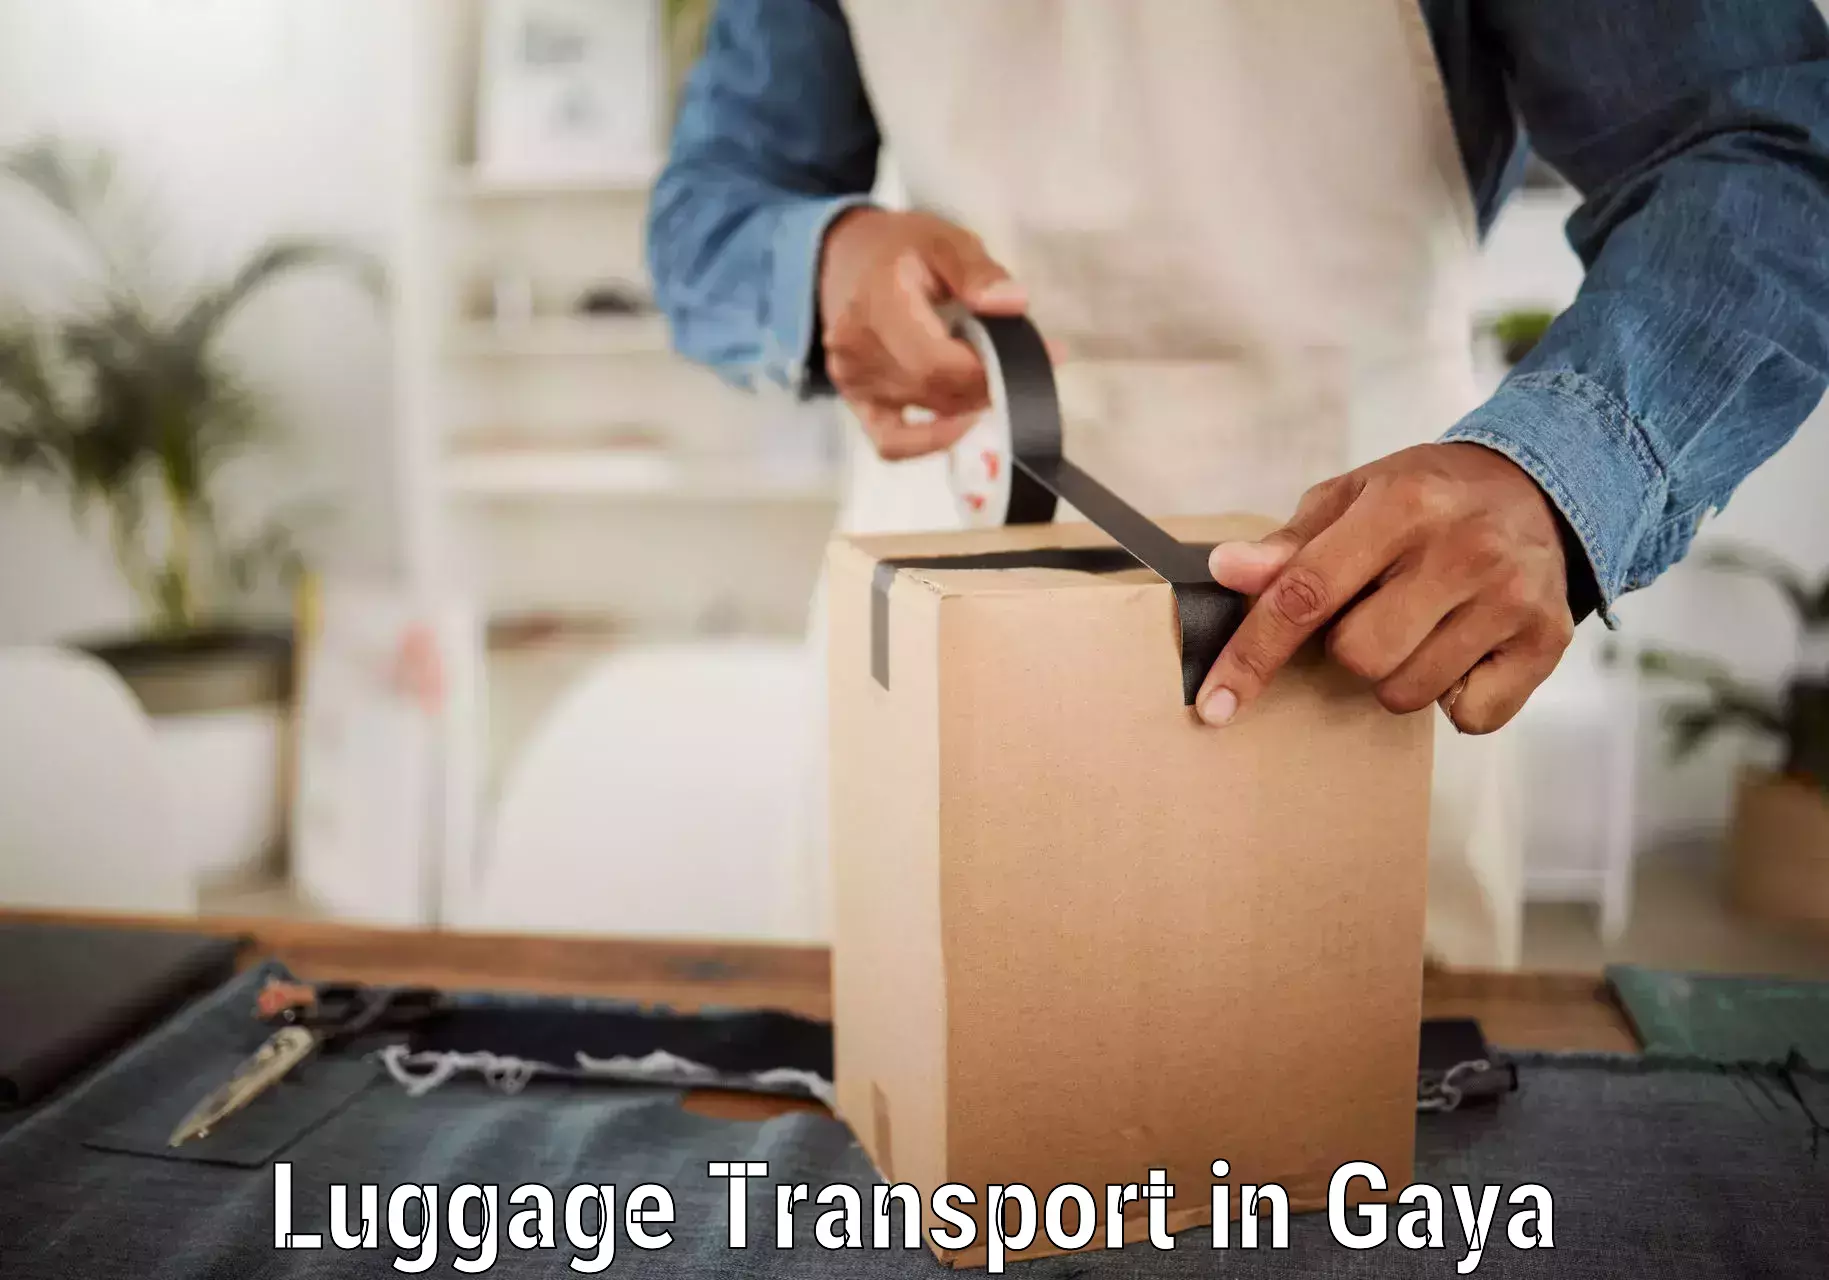 Instant baggage transport quote in Gaya